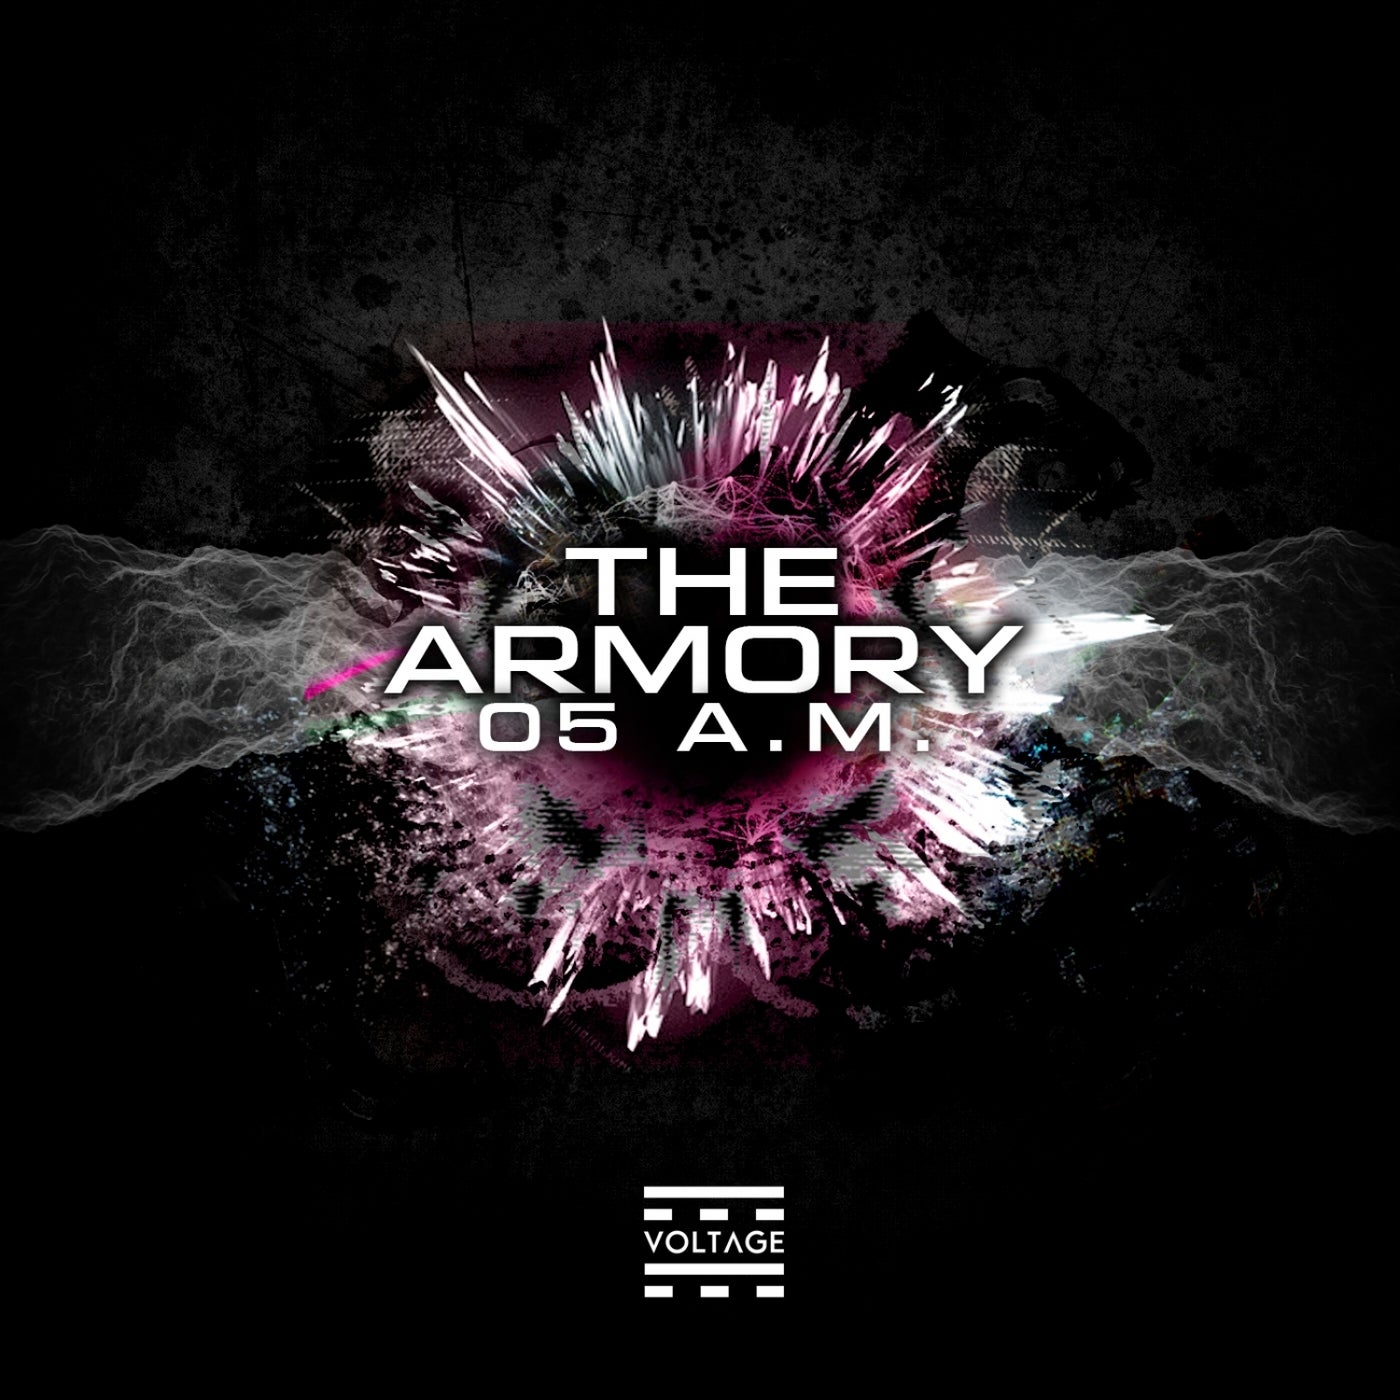 The Armory: 05Am